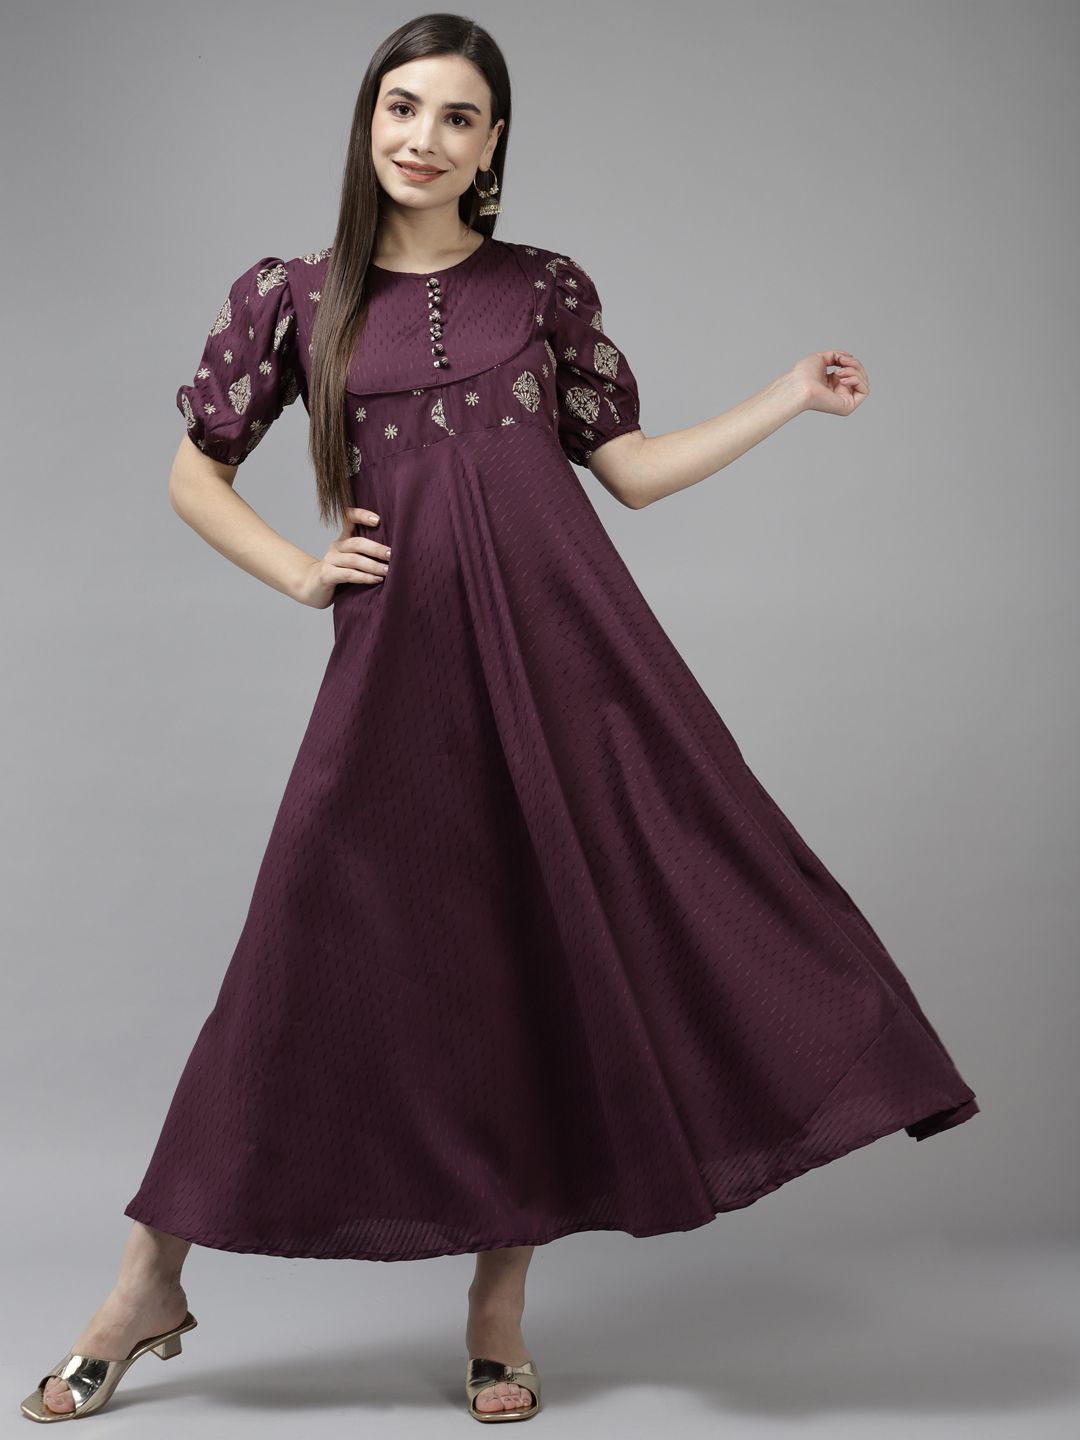 Yufta Burgundy Solid A-Line Ethnic Maxi Dress Price in India